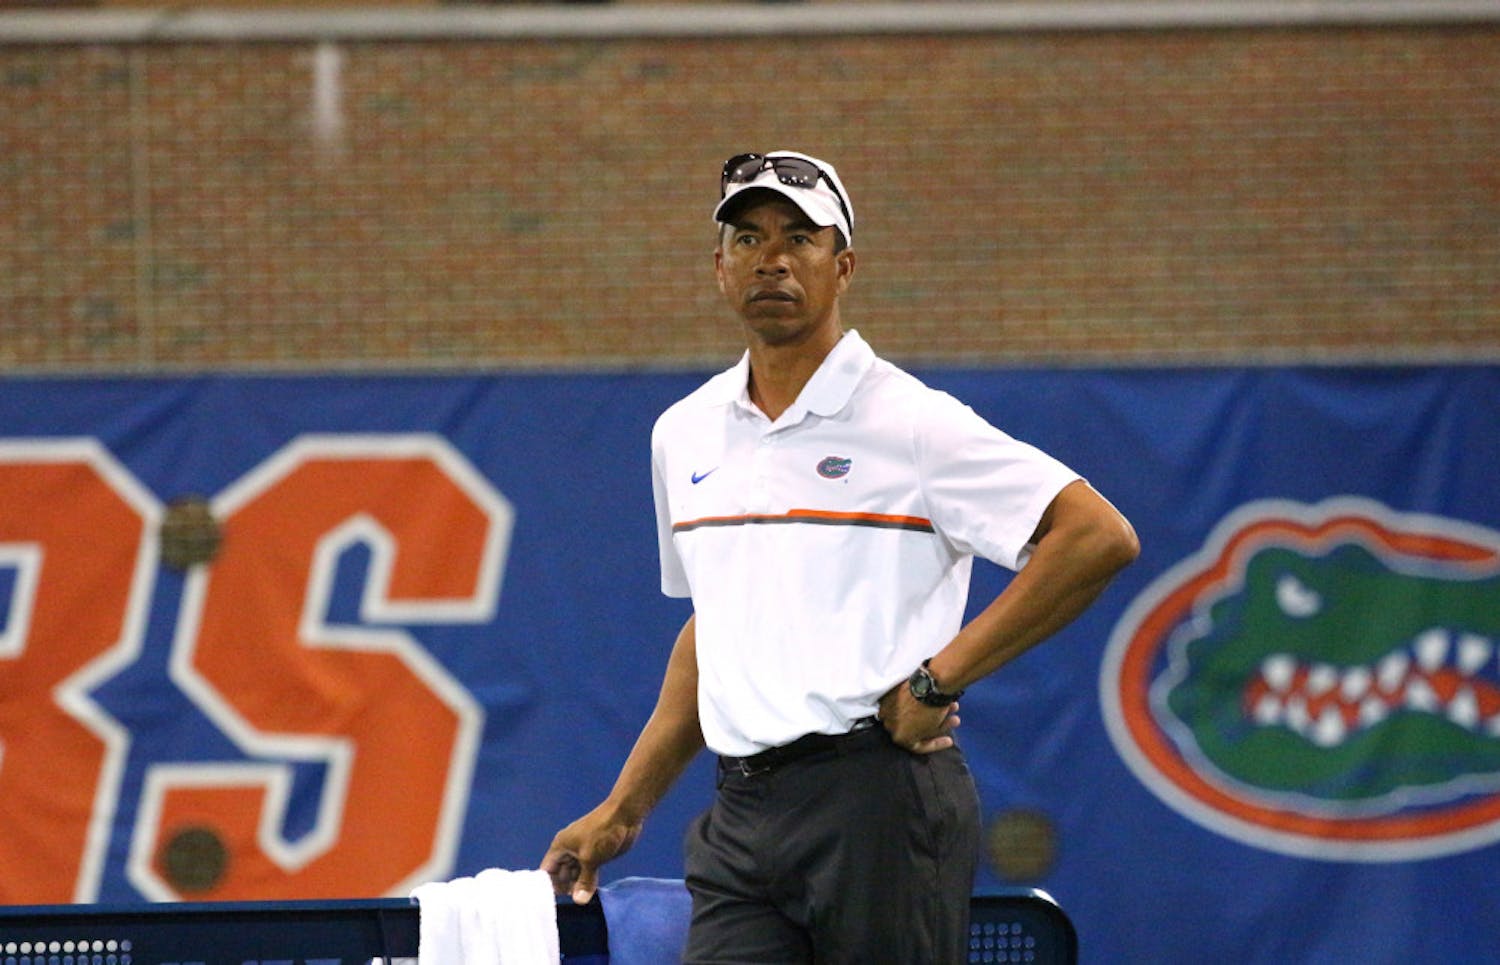 Coach Bryan Shelton and the No. 6 Gators men's tennis team are playing for a bid to the ITA National Team Indoor Championship this weekend in Gainesville. 